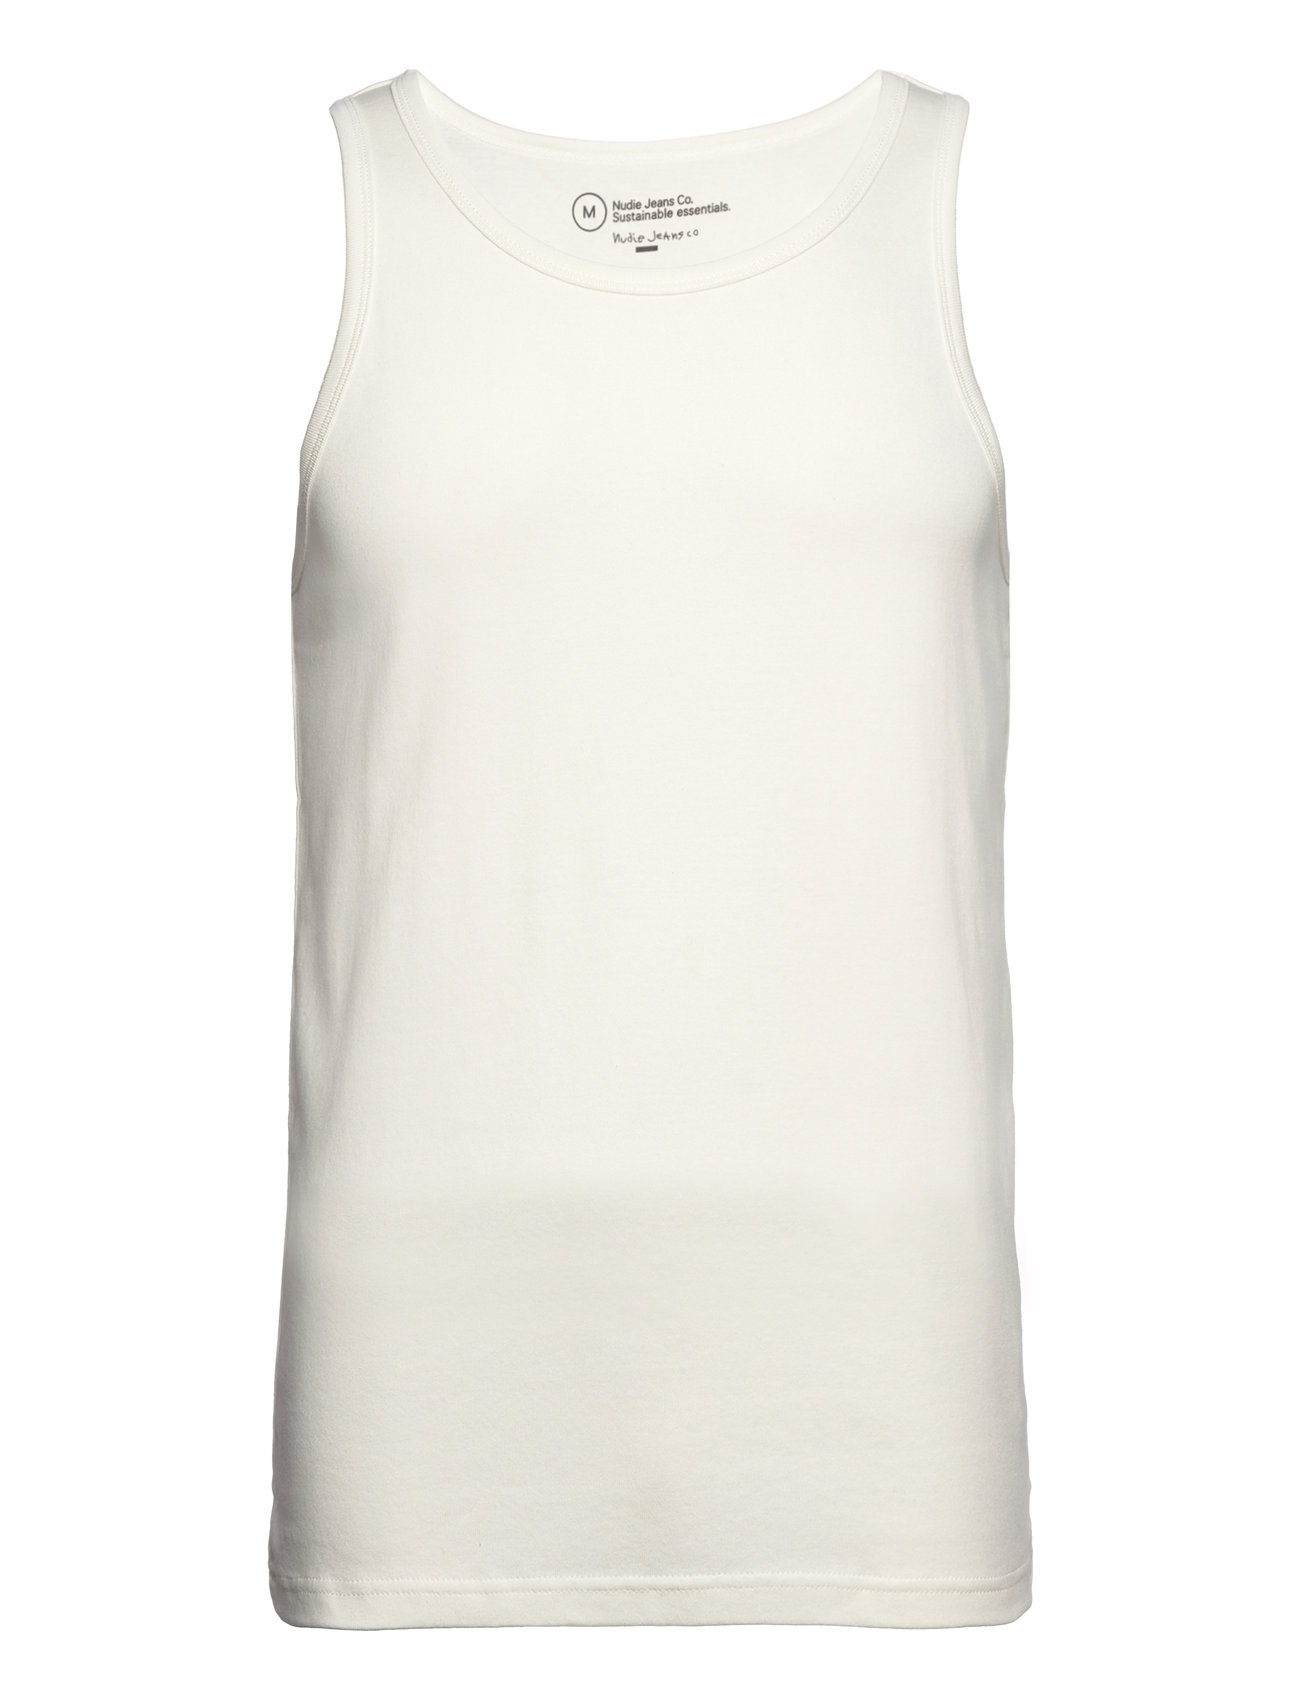 Tank Top Nudie Jeans Designers T-shirts Sleeveless White Nudie Jeans